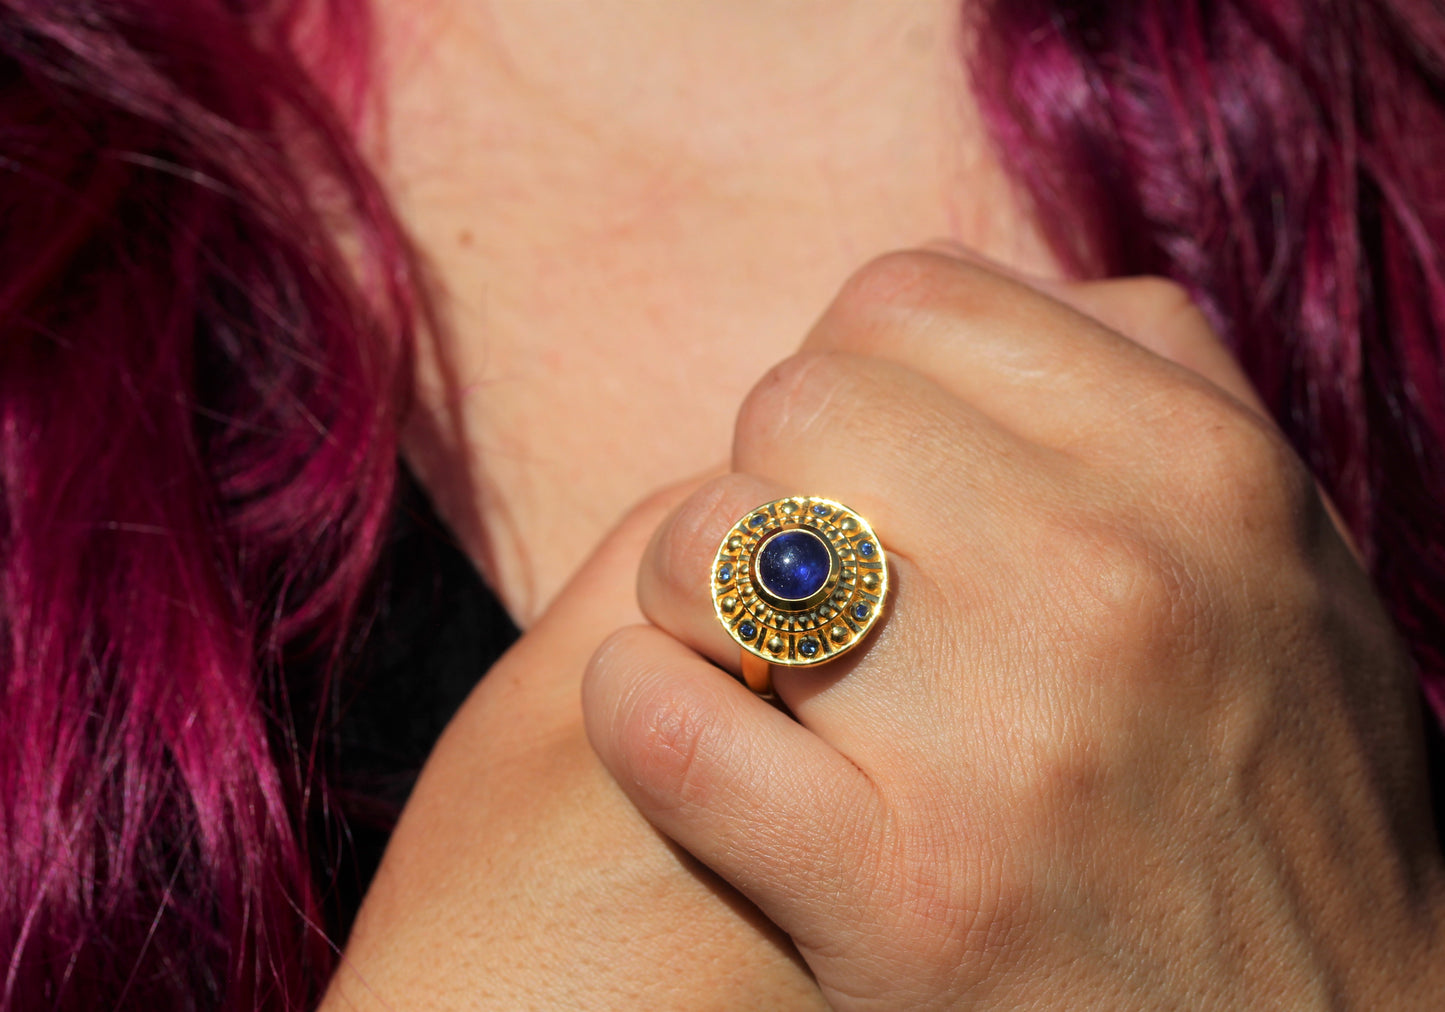 Blue Sapphire Medallion Ring - 24k Gold Plated - Adjustable Size #298